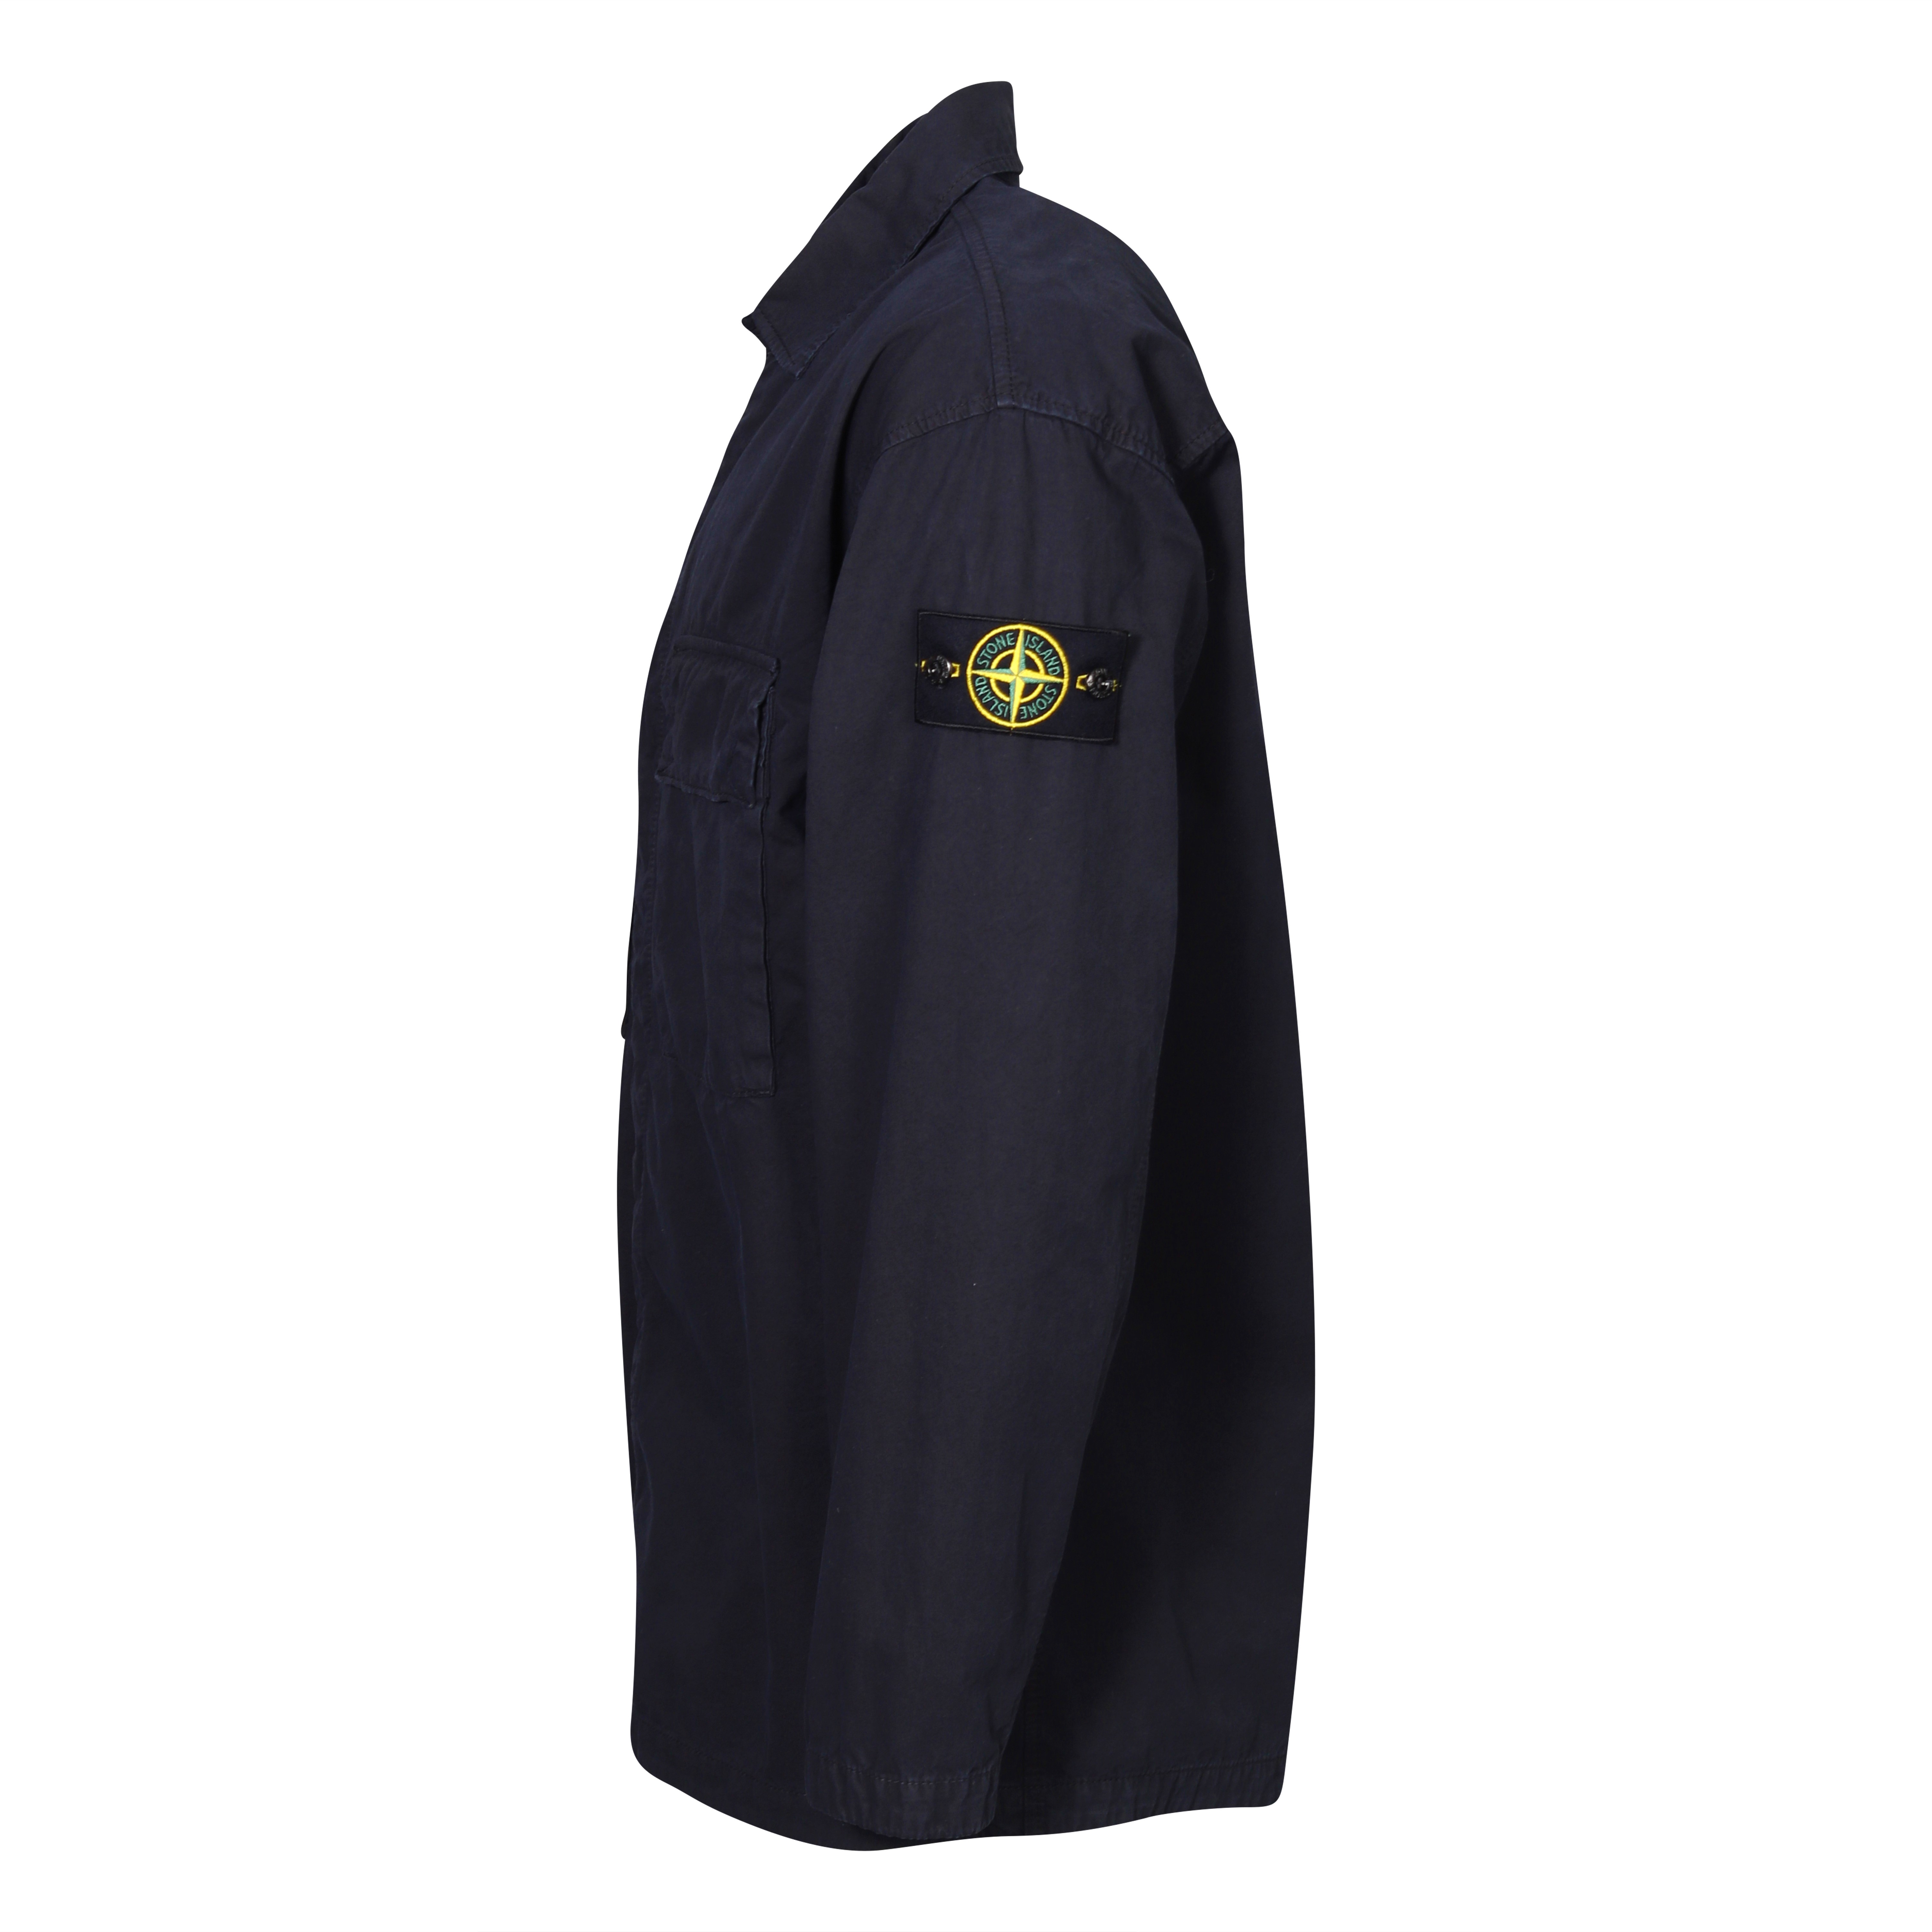 STONE ISLAND Cotton Overshirt in Washed Navy